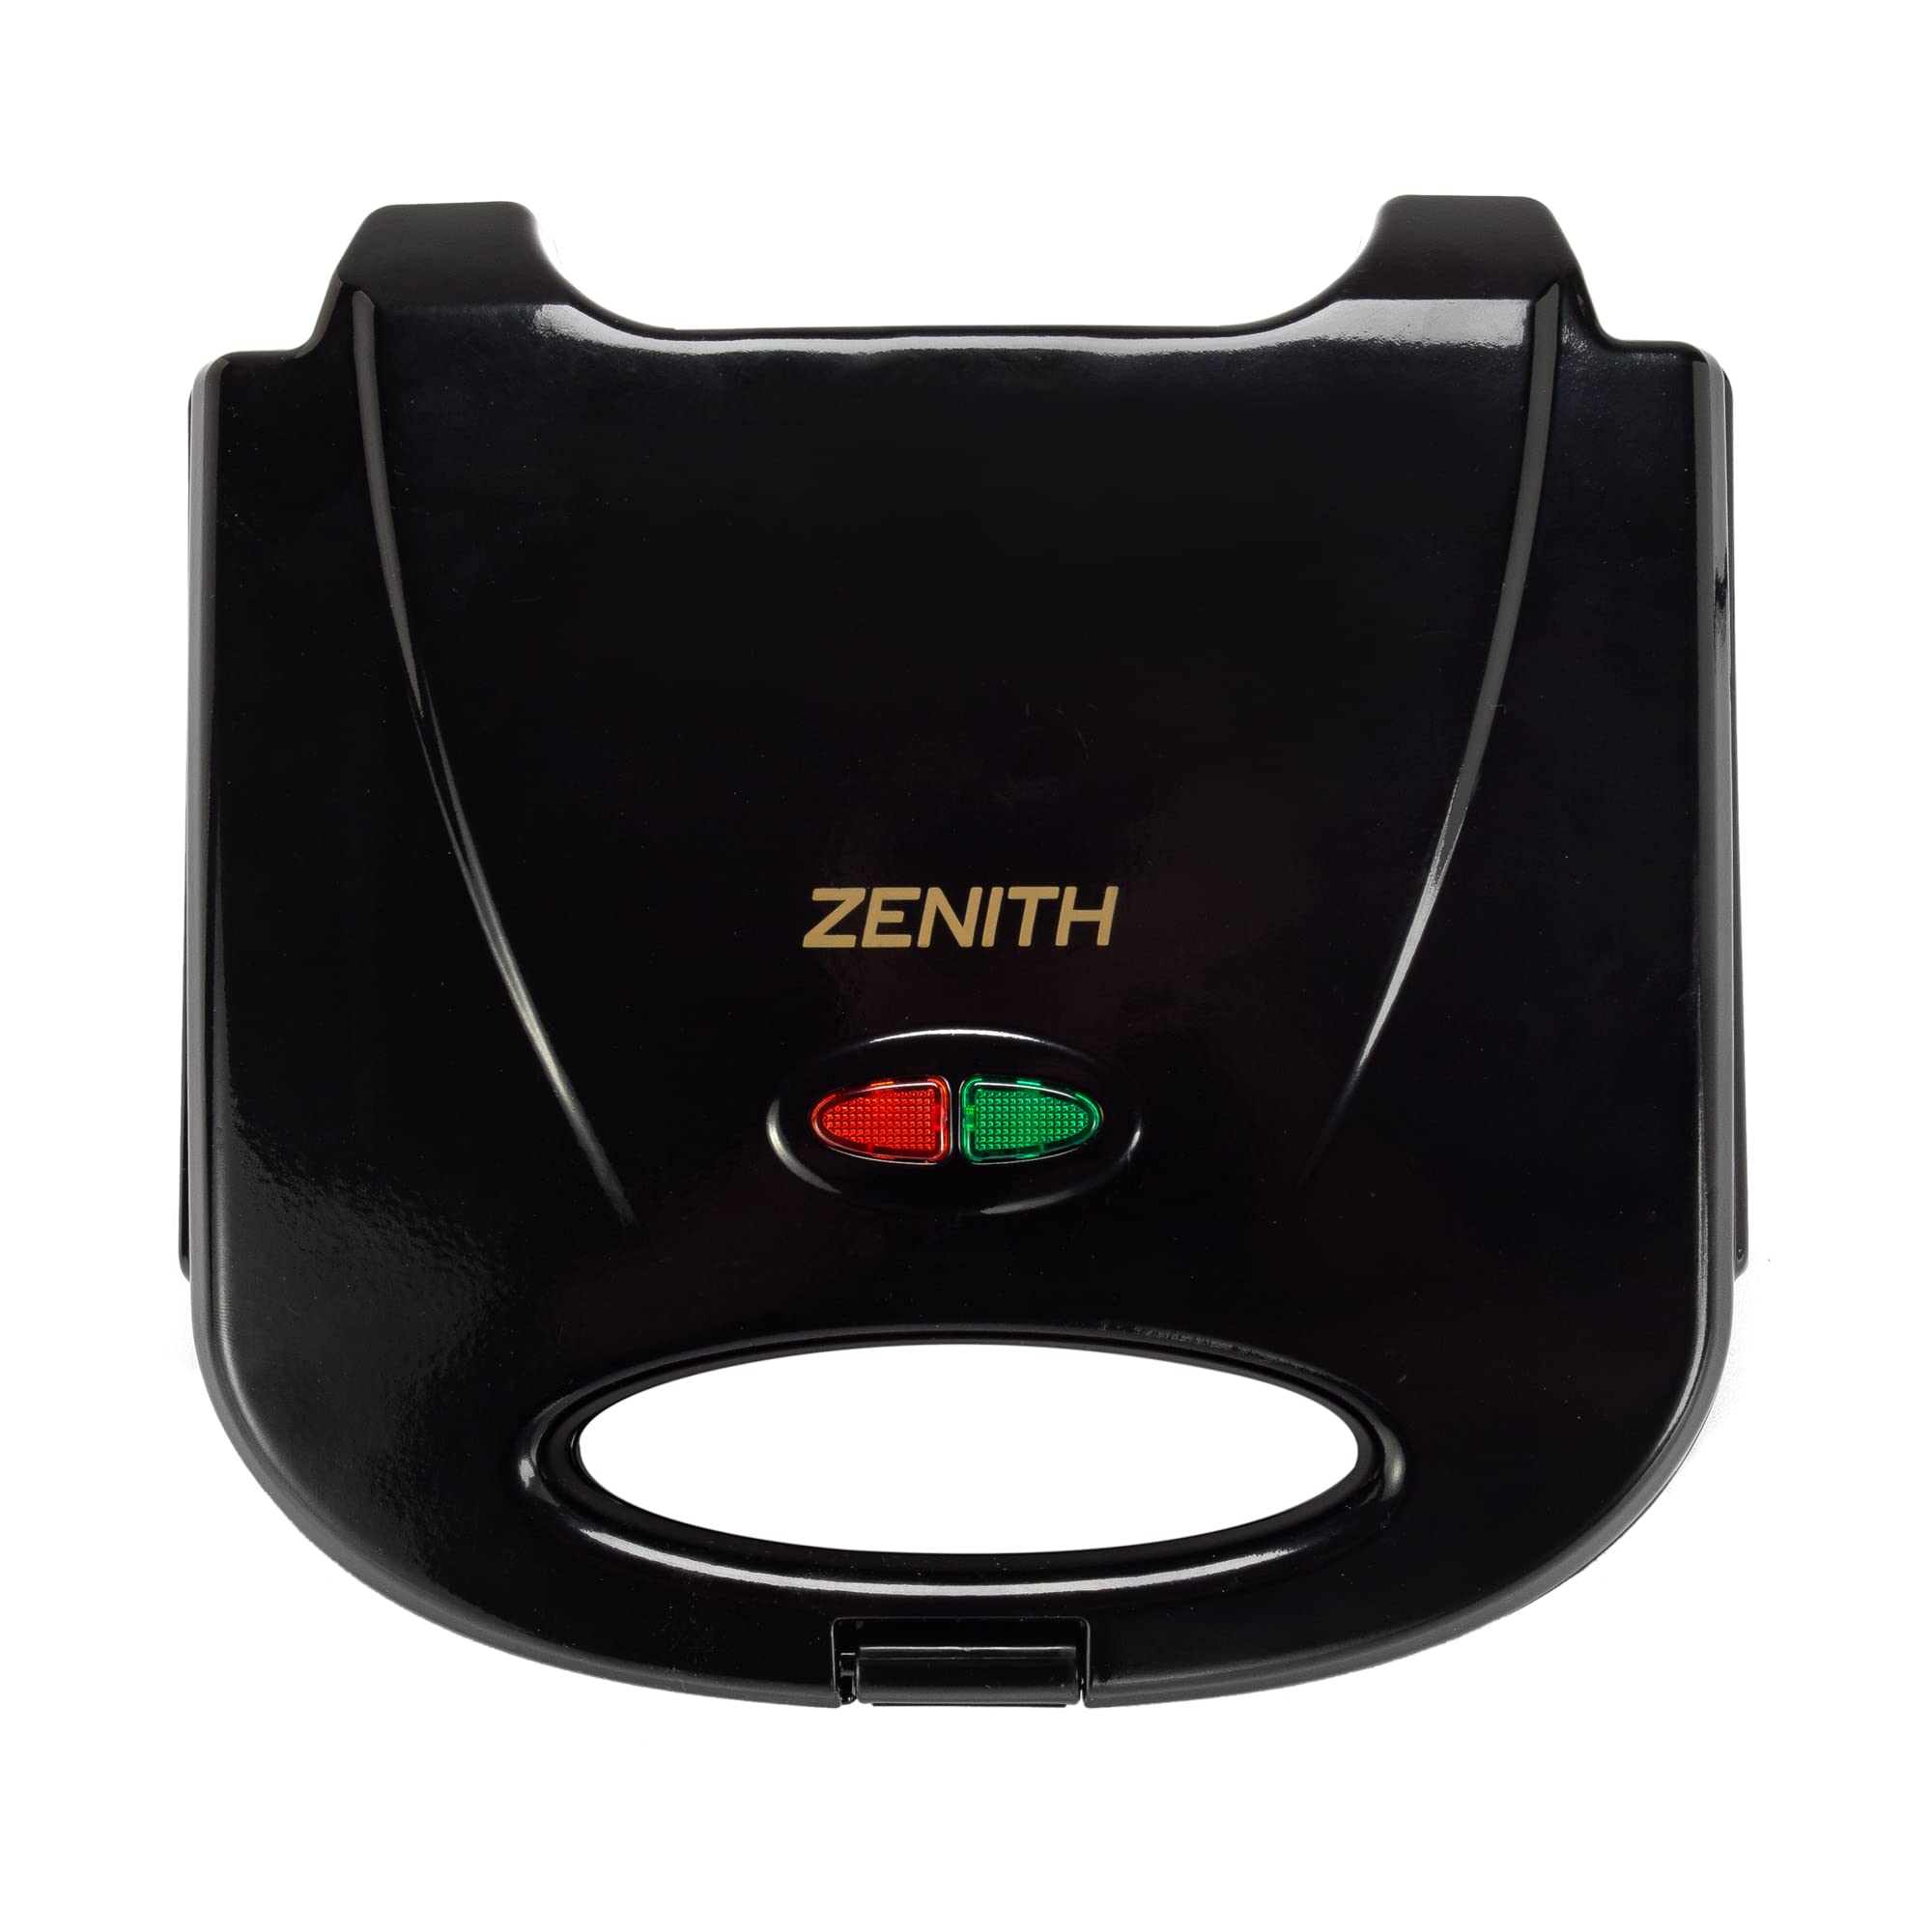 ZENITH Zenith Electric Indoor Panini Grill Maker with Zera Copper Non-Stick Grilling Plates, Countertop Bread Toaster Easy Storage 77062 0